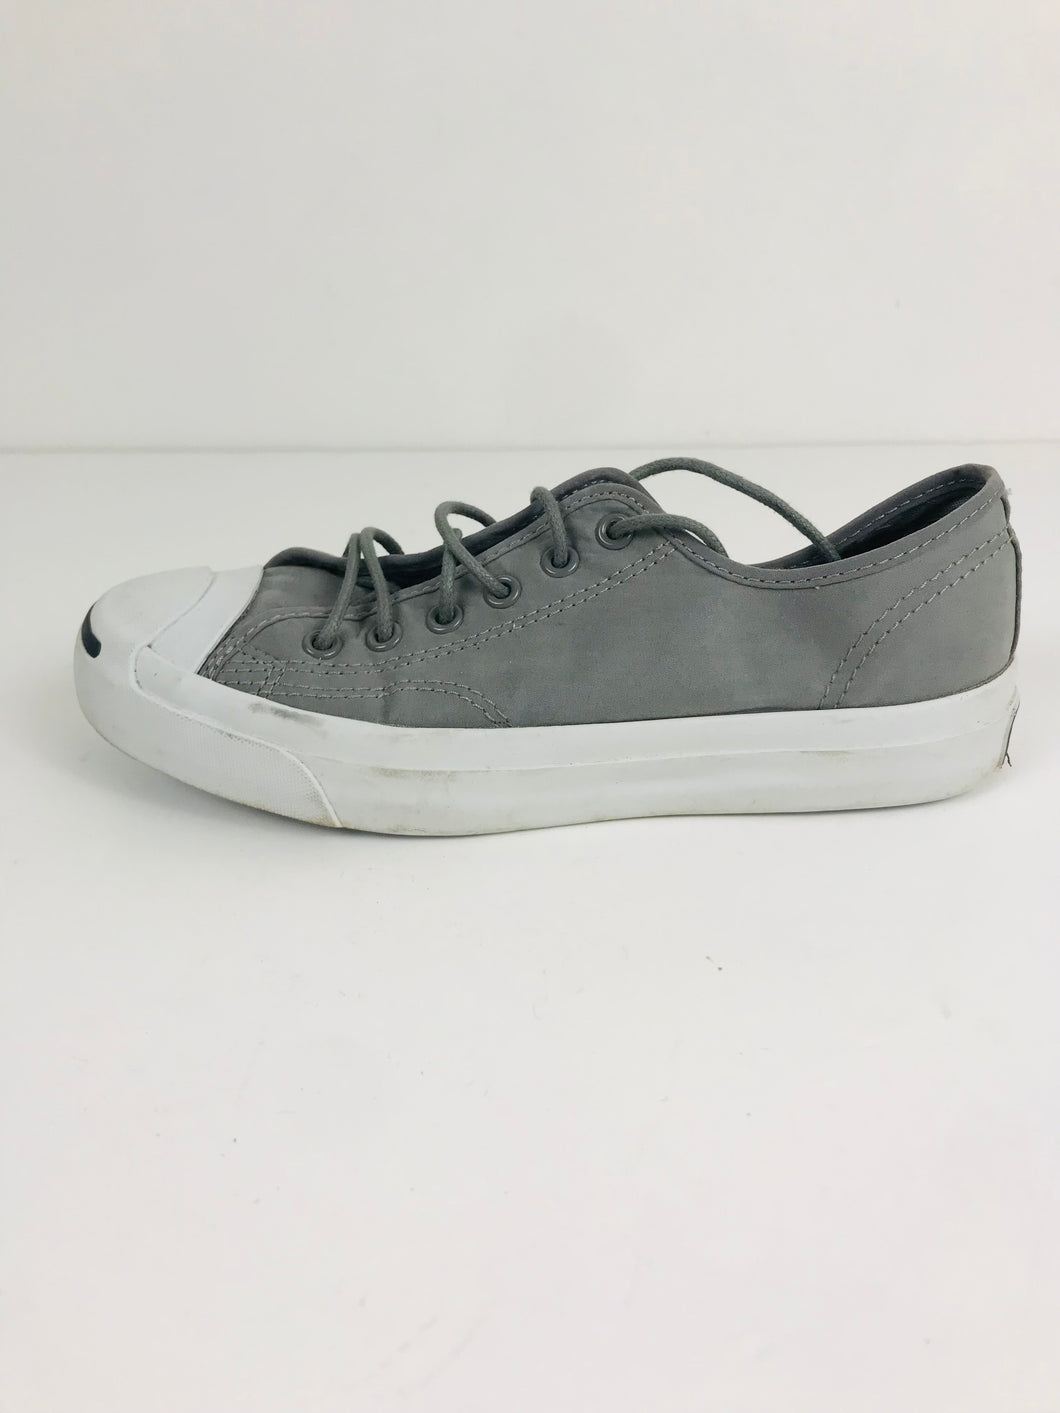 Converse Jack Purcell Women's Trainers | UK5 | Grey